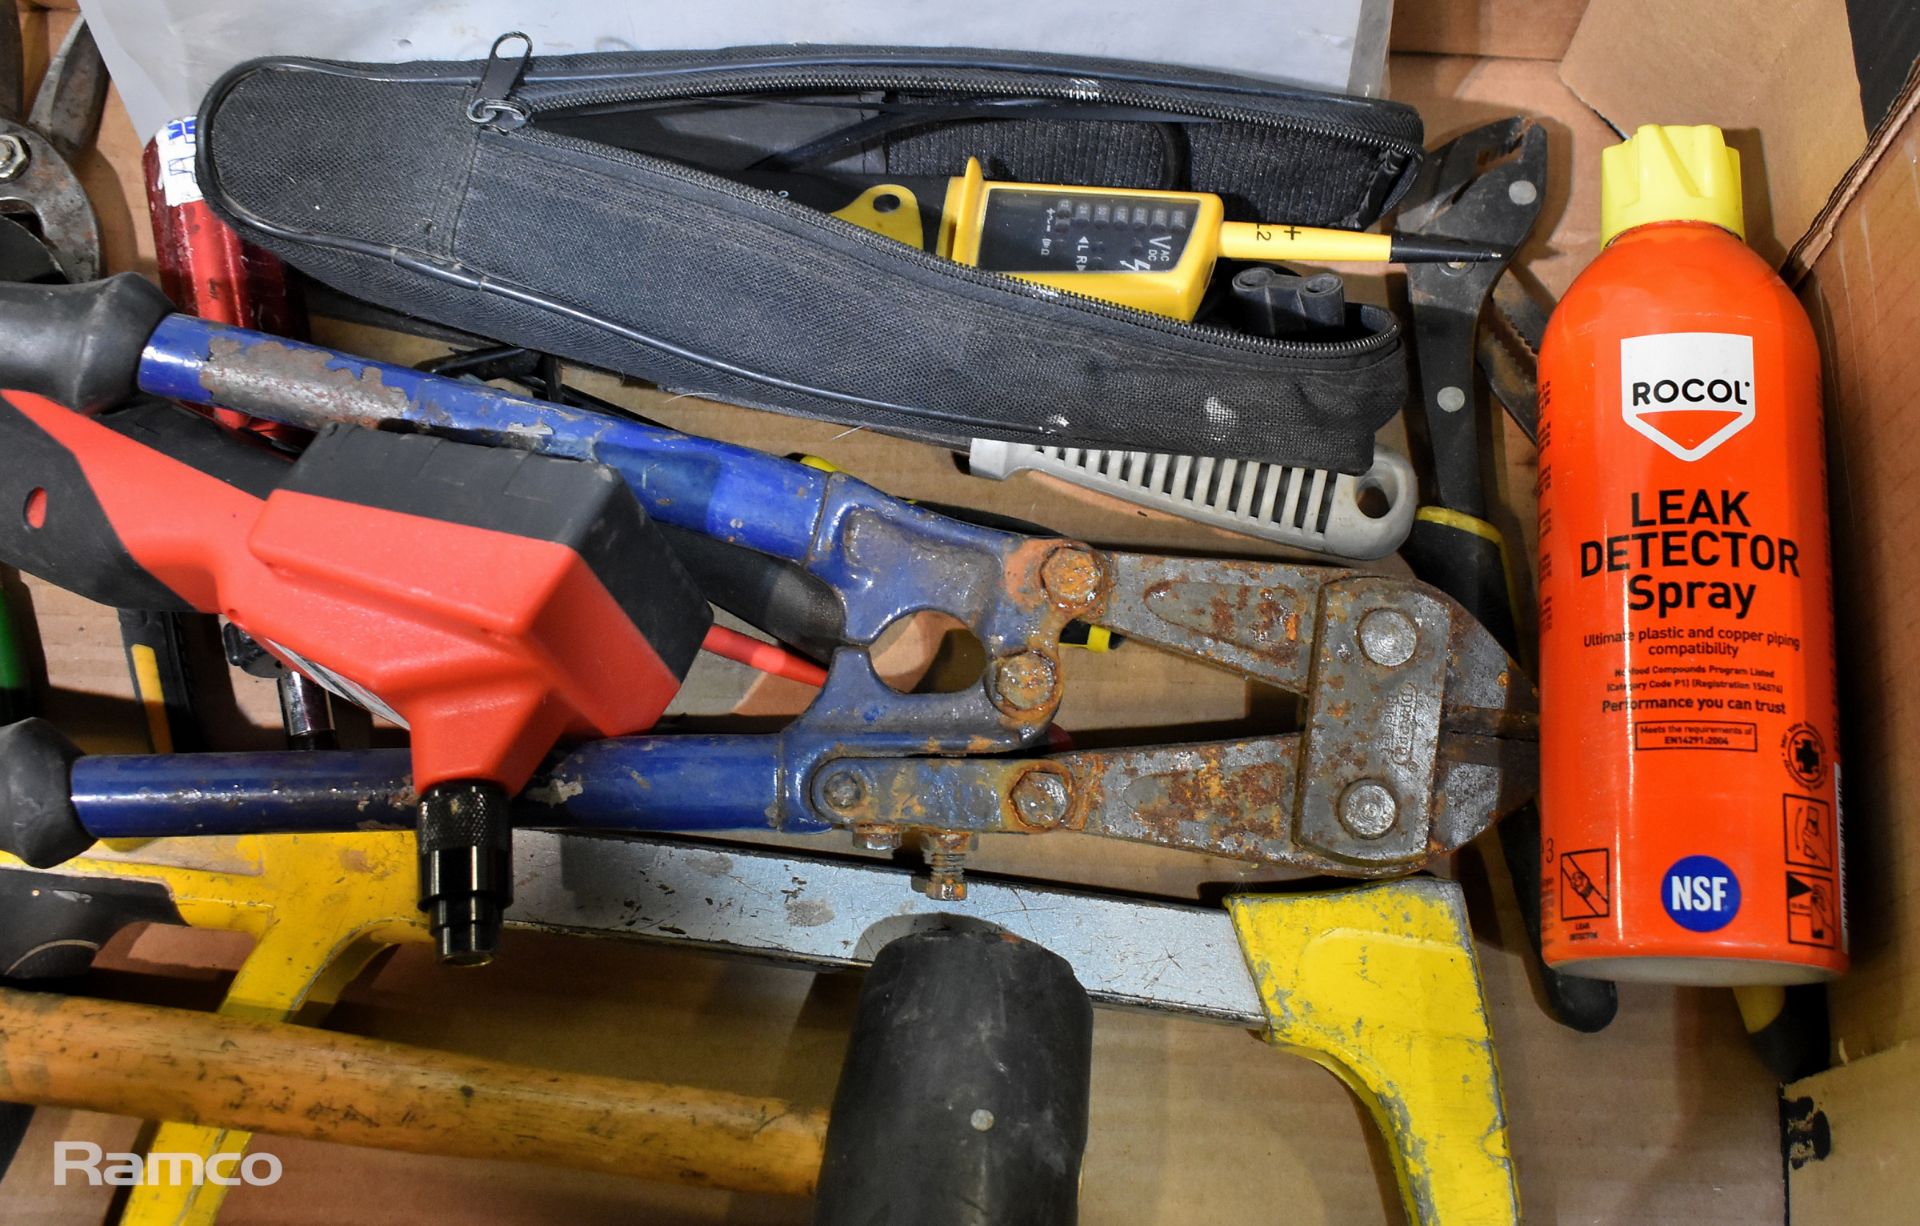 Hand tools - Saw, pliers, cutters, metal snips, bolt cutter, mallet, circuit tester, screwdrivers - Image 3 of 5